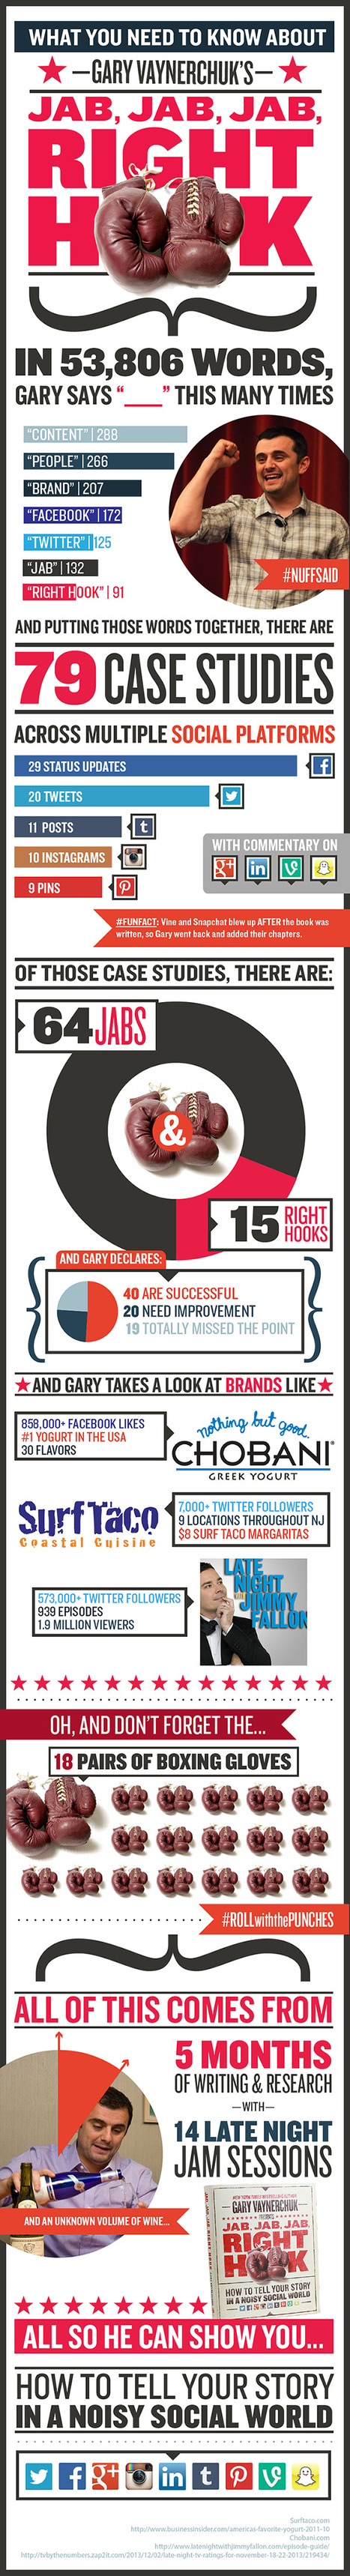 What You Need to Know About Jab, Jab, Jab, Right Hook by Gary Vaynerchuk [Infographic] | Must Market | Scoop.it